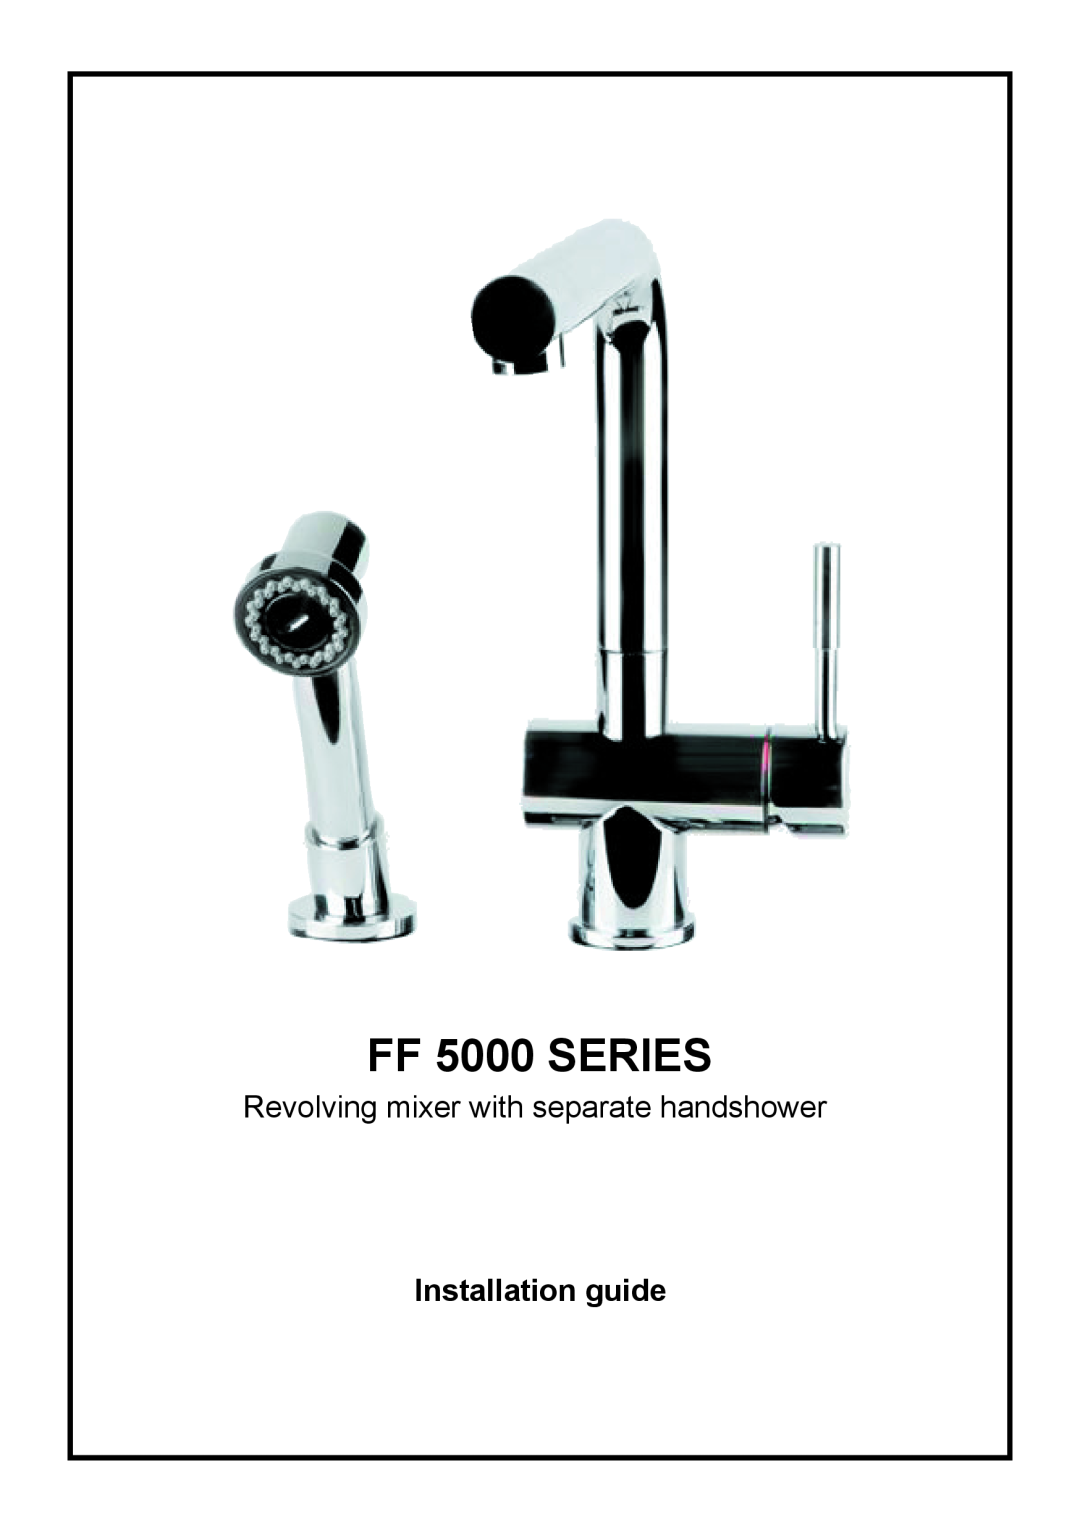 Franke Consumer Products manual FF 5000 SERIES, Revolving mixer with separate handshower, Installation guide 